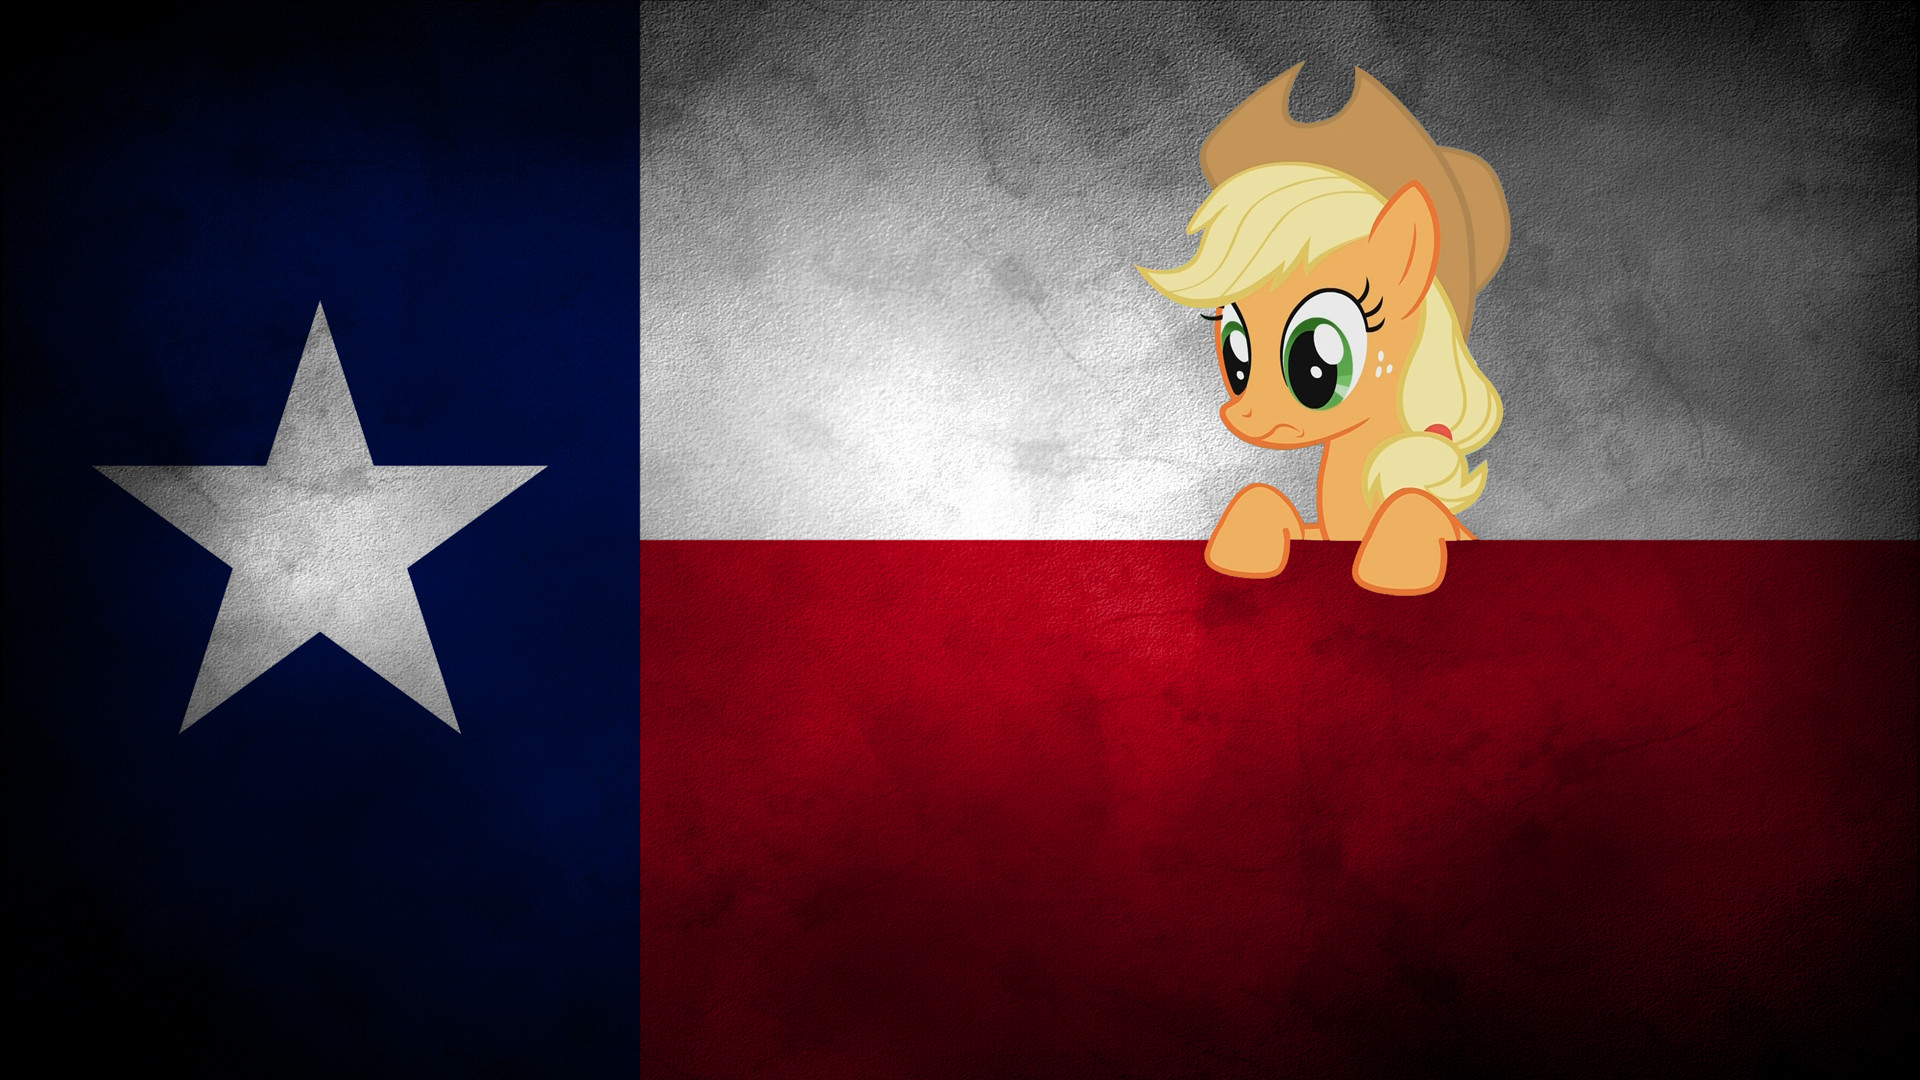 1920x1080 State Of Texas Wallpaper The texas state flag 